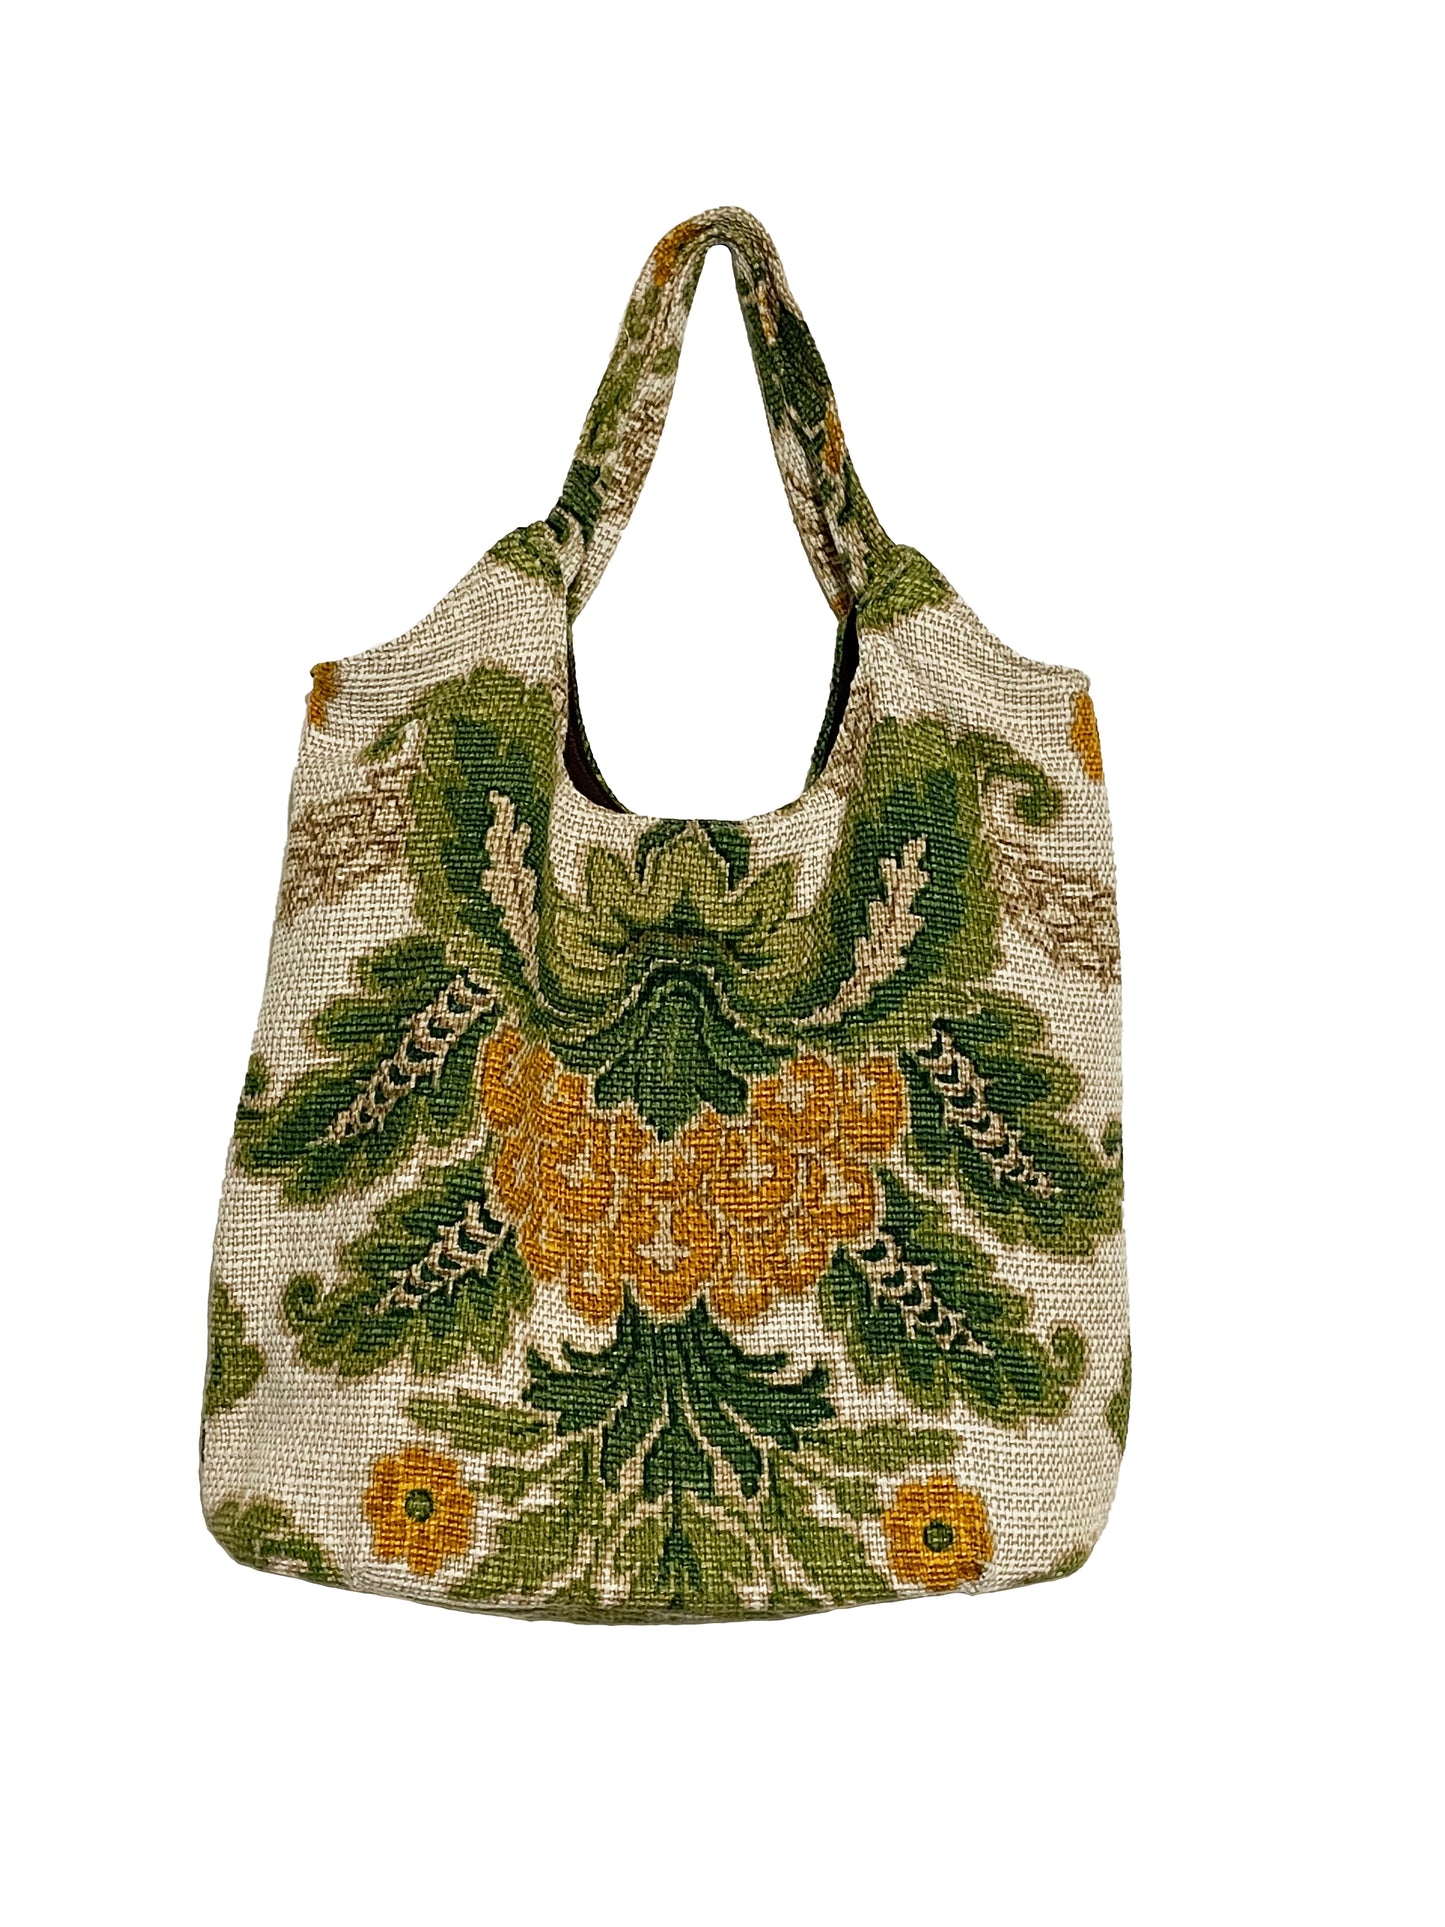 Upcycling jute bag vintage flower with short handles